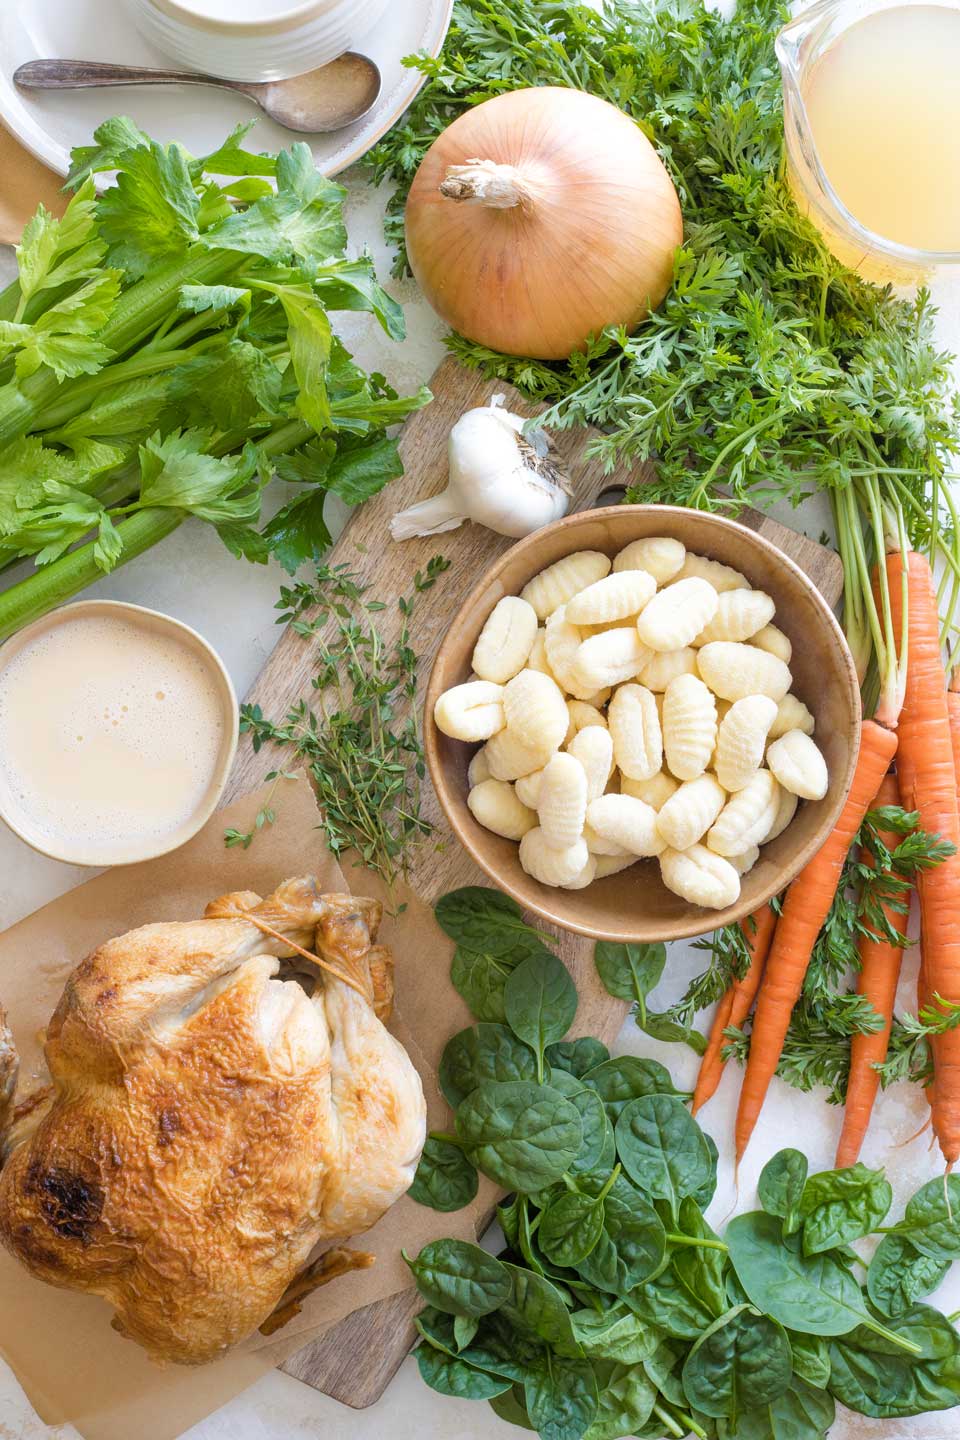 Soup ingredients: whole rotisserie chicken, bowl of frozen gnocchi, onion, head of garlic, carrots with tops on, spinach leaves, chicken broth, fresh thyme and milk.